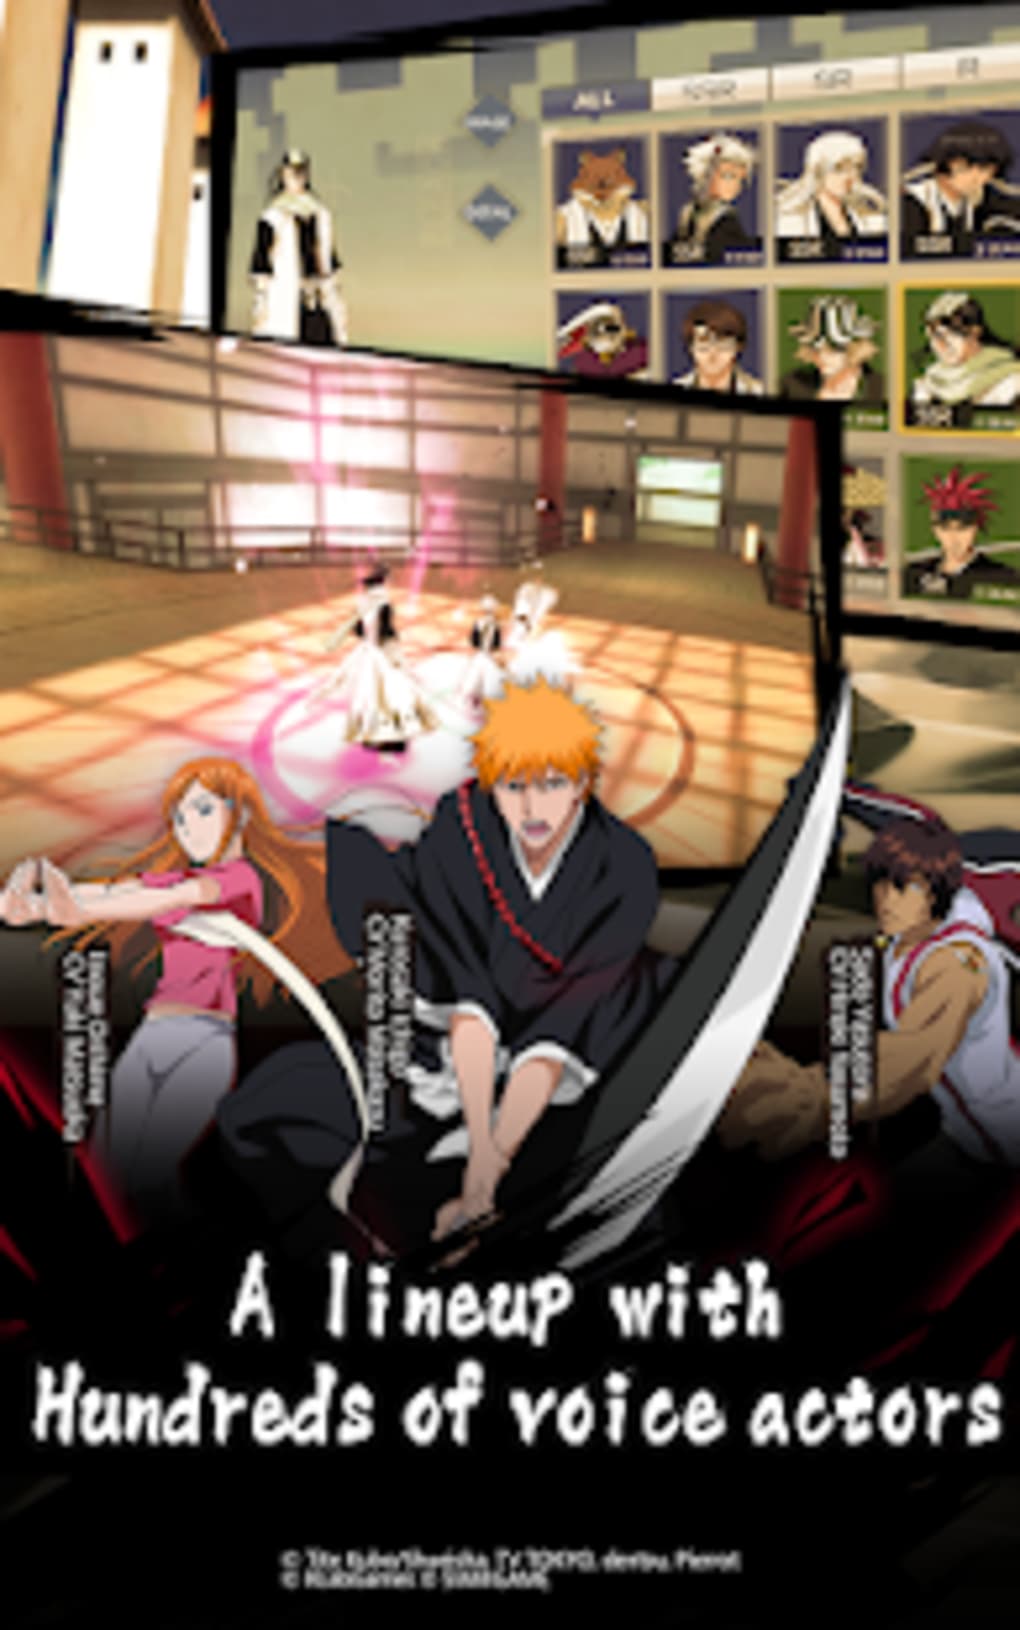 Play BLEACH Mobile 3D on PC For Free - Download at